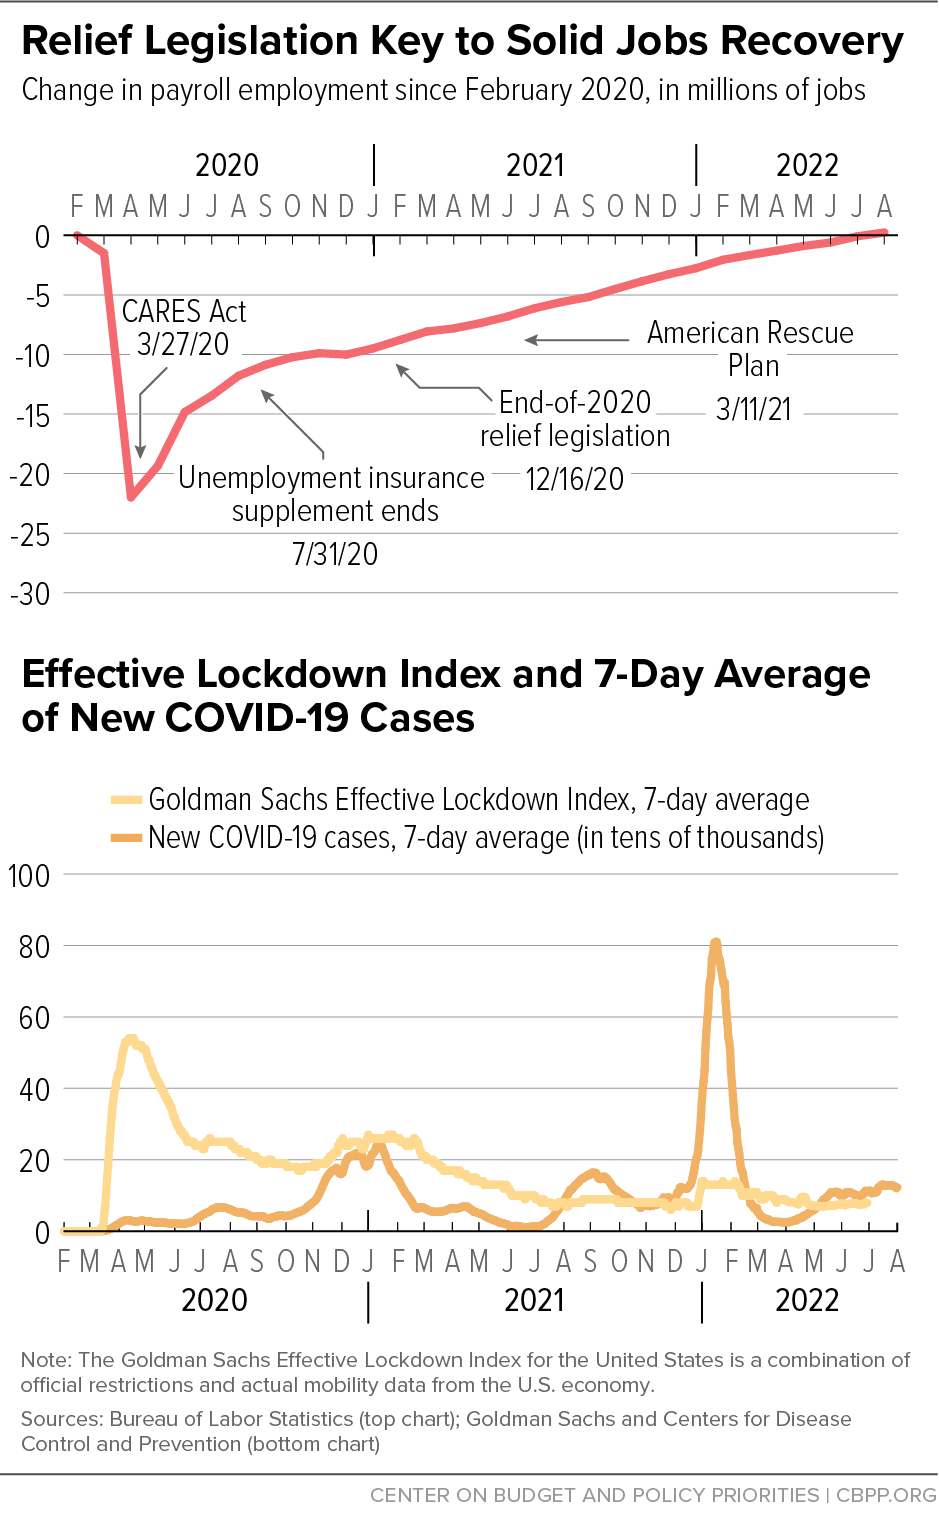 Relief Legislation Key to Solid Jobs Recovery; Effective Lockdown Index and 7-Day Average of New COVID-19 Cases